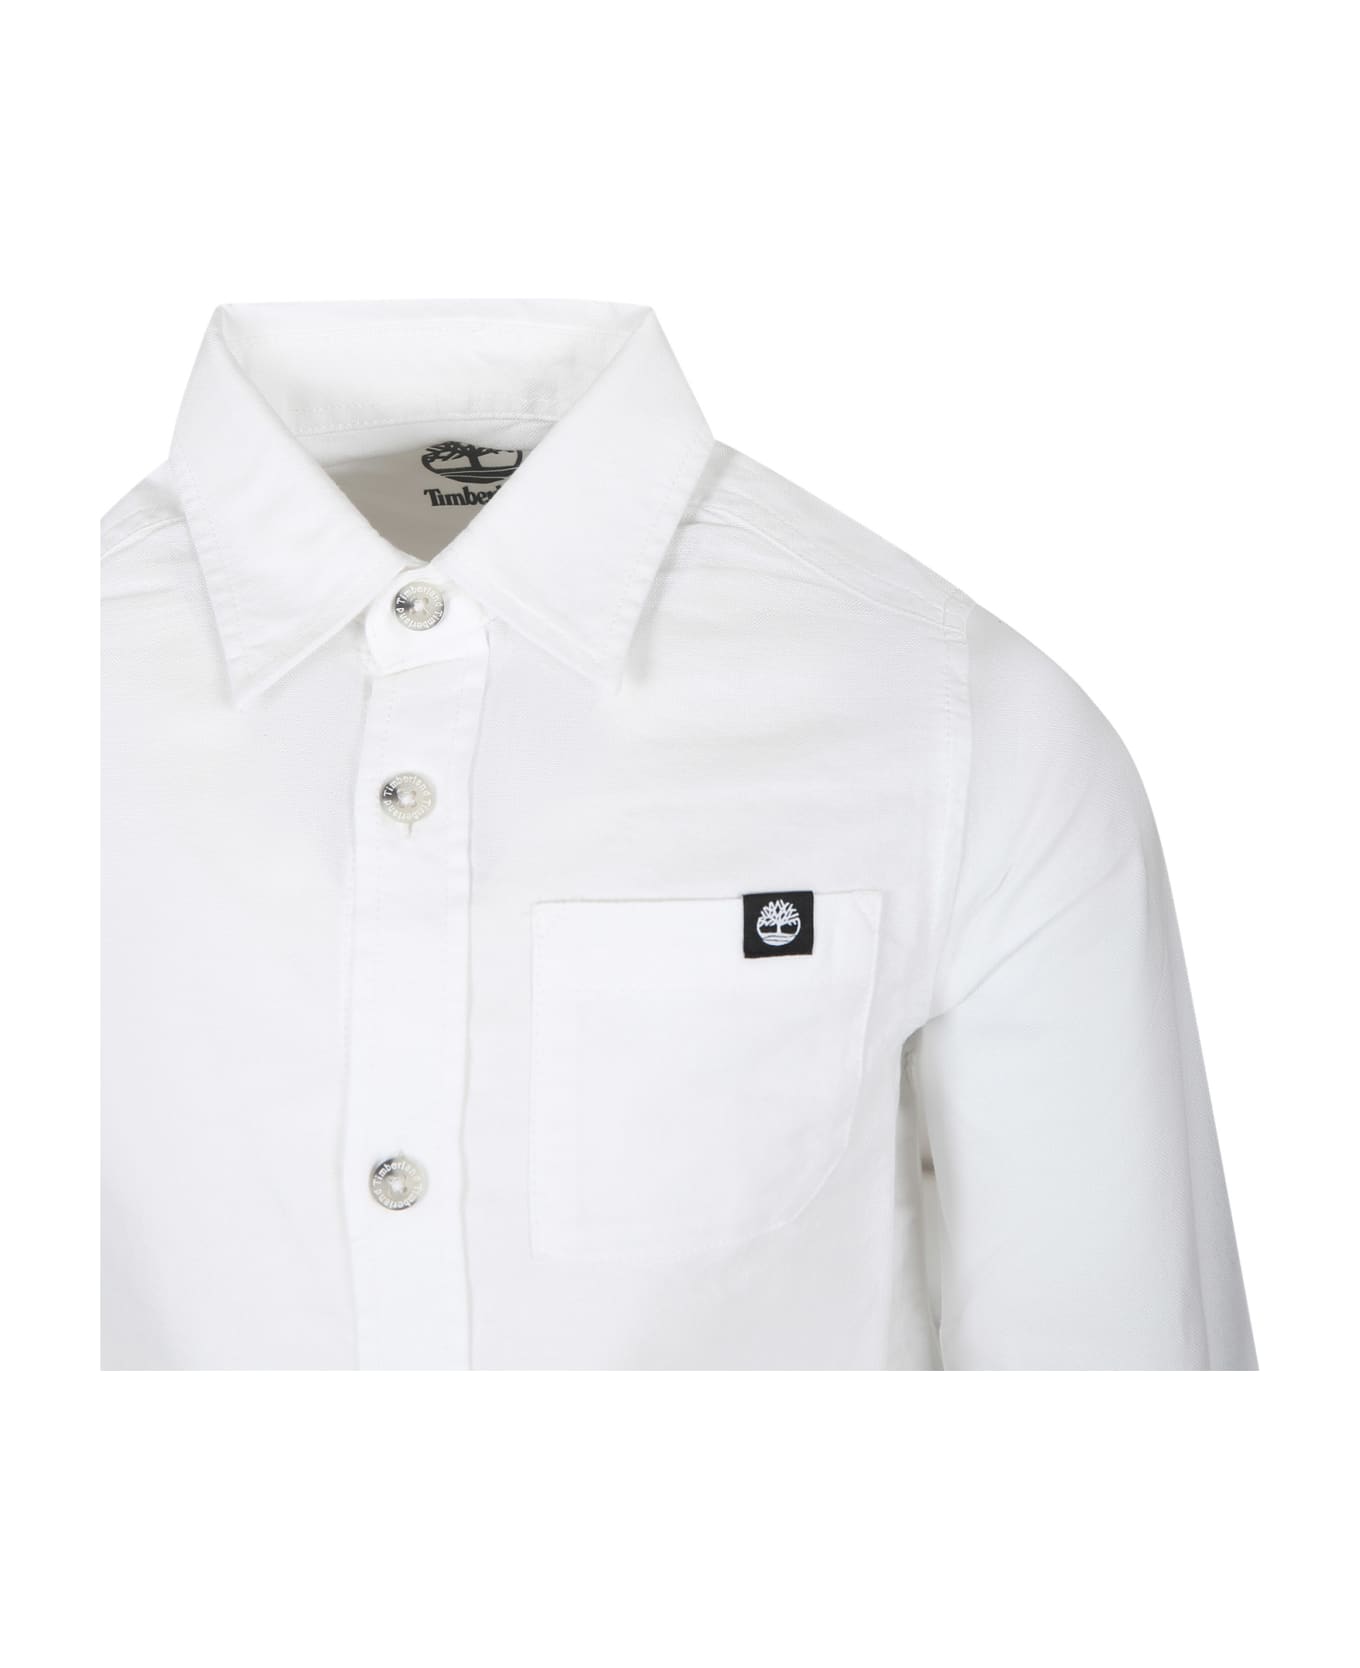 Timberland White Shirt For Boy With Logo - White シャツ